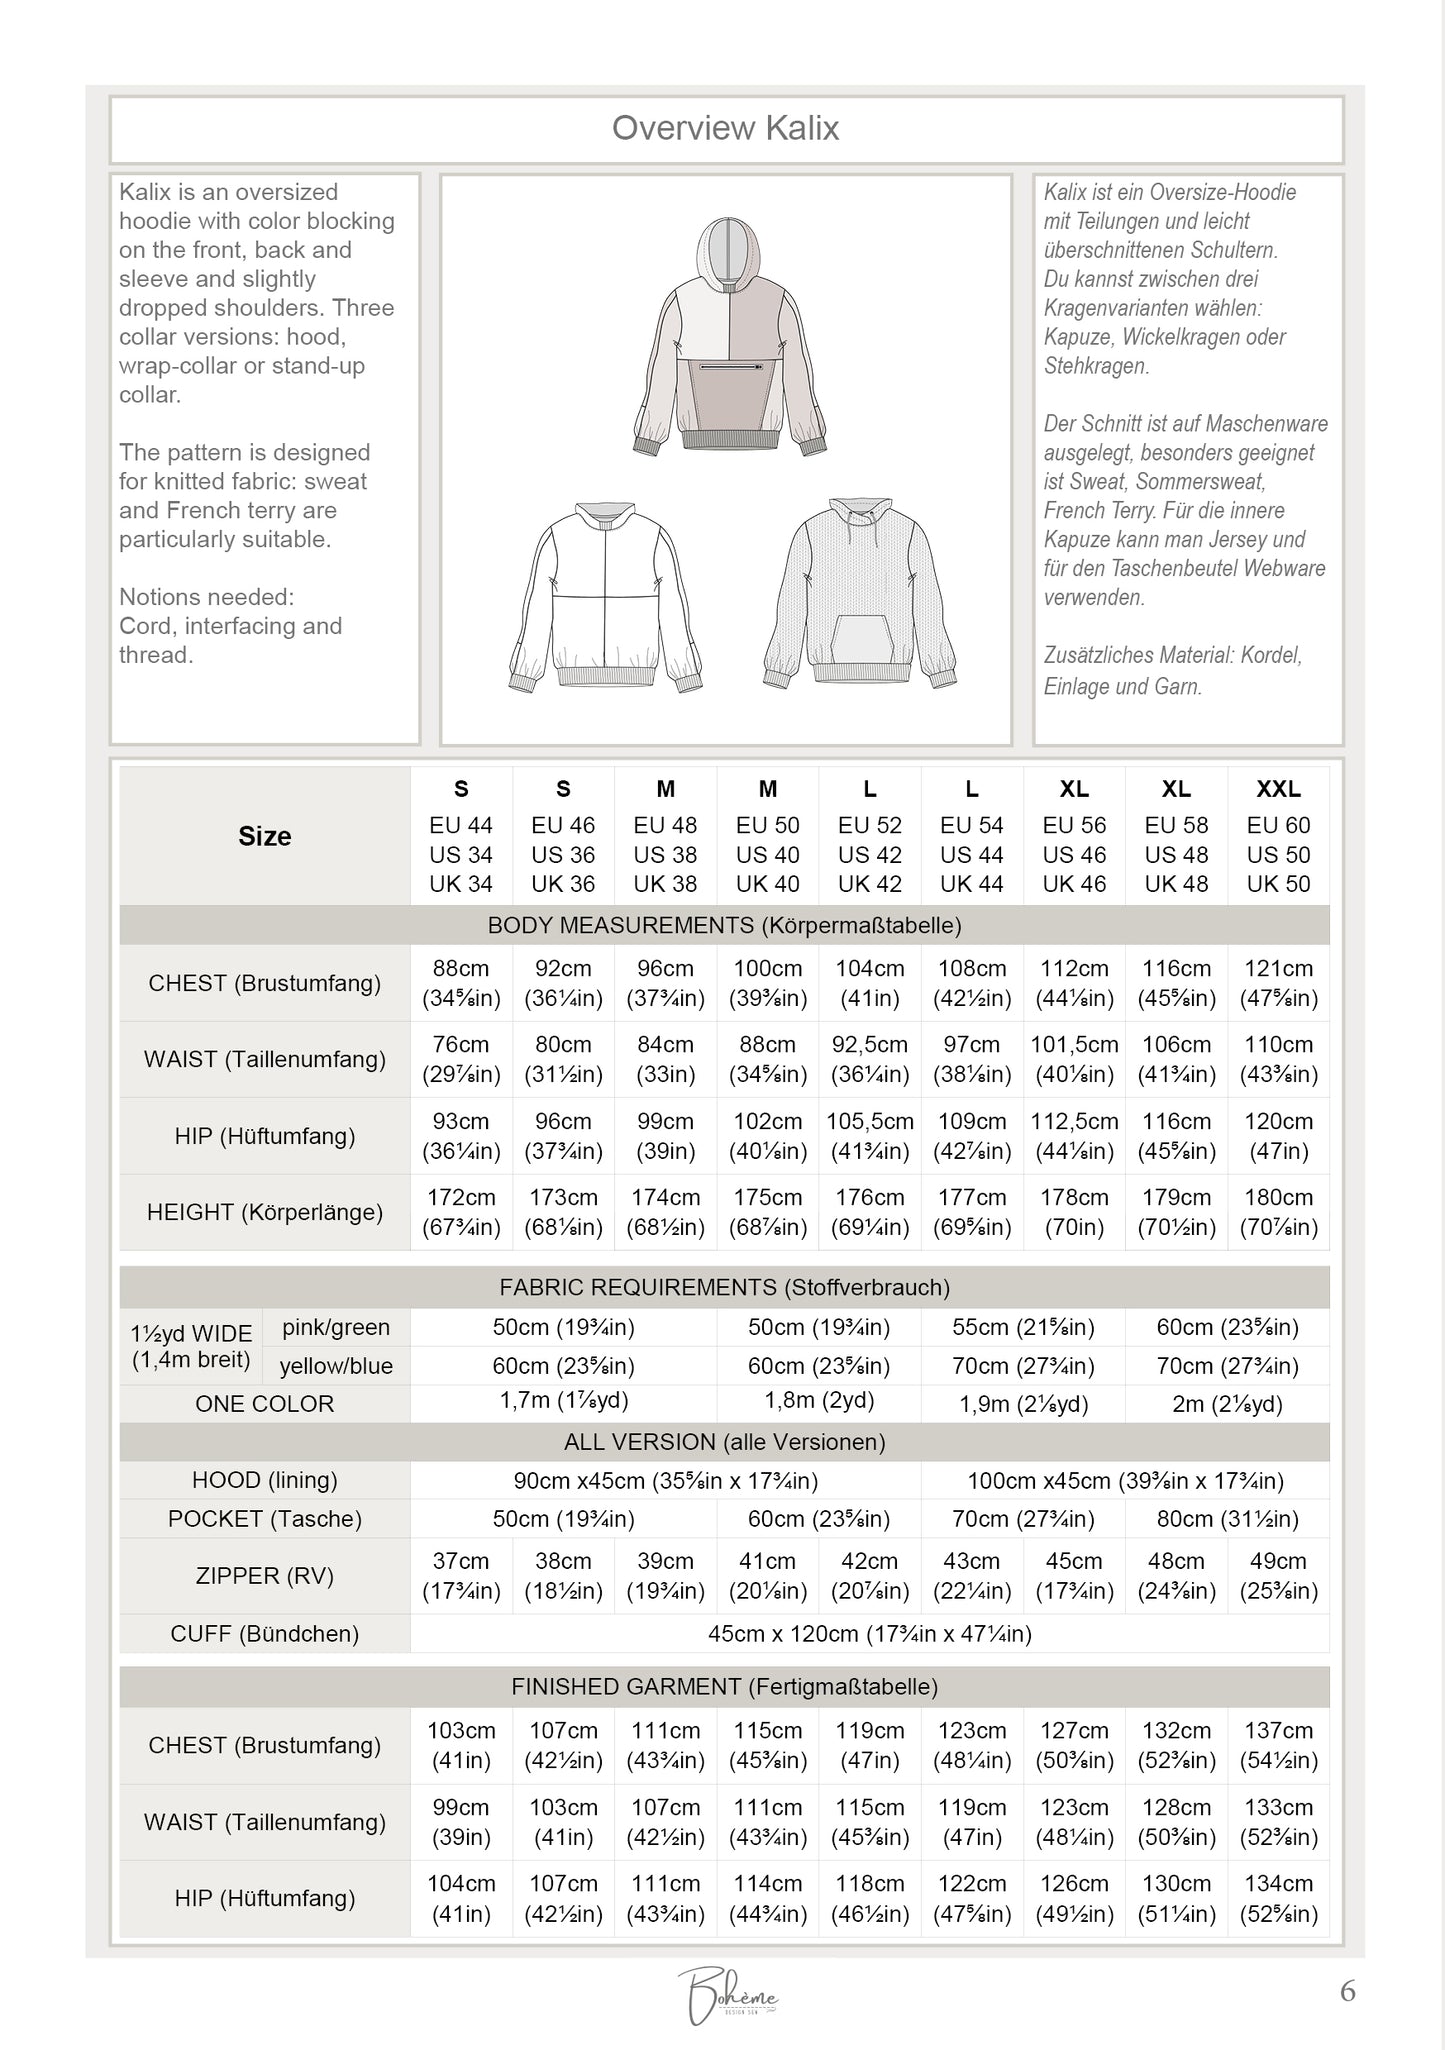 Hoodie | Kalix M1409 | Man S - XXL | Digital Sewing Pattern | PDF | Projector | Bohème | Pullover | Sweater | Color Blocking